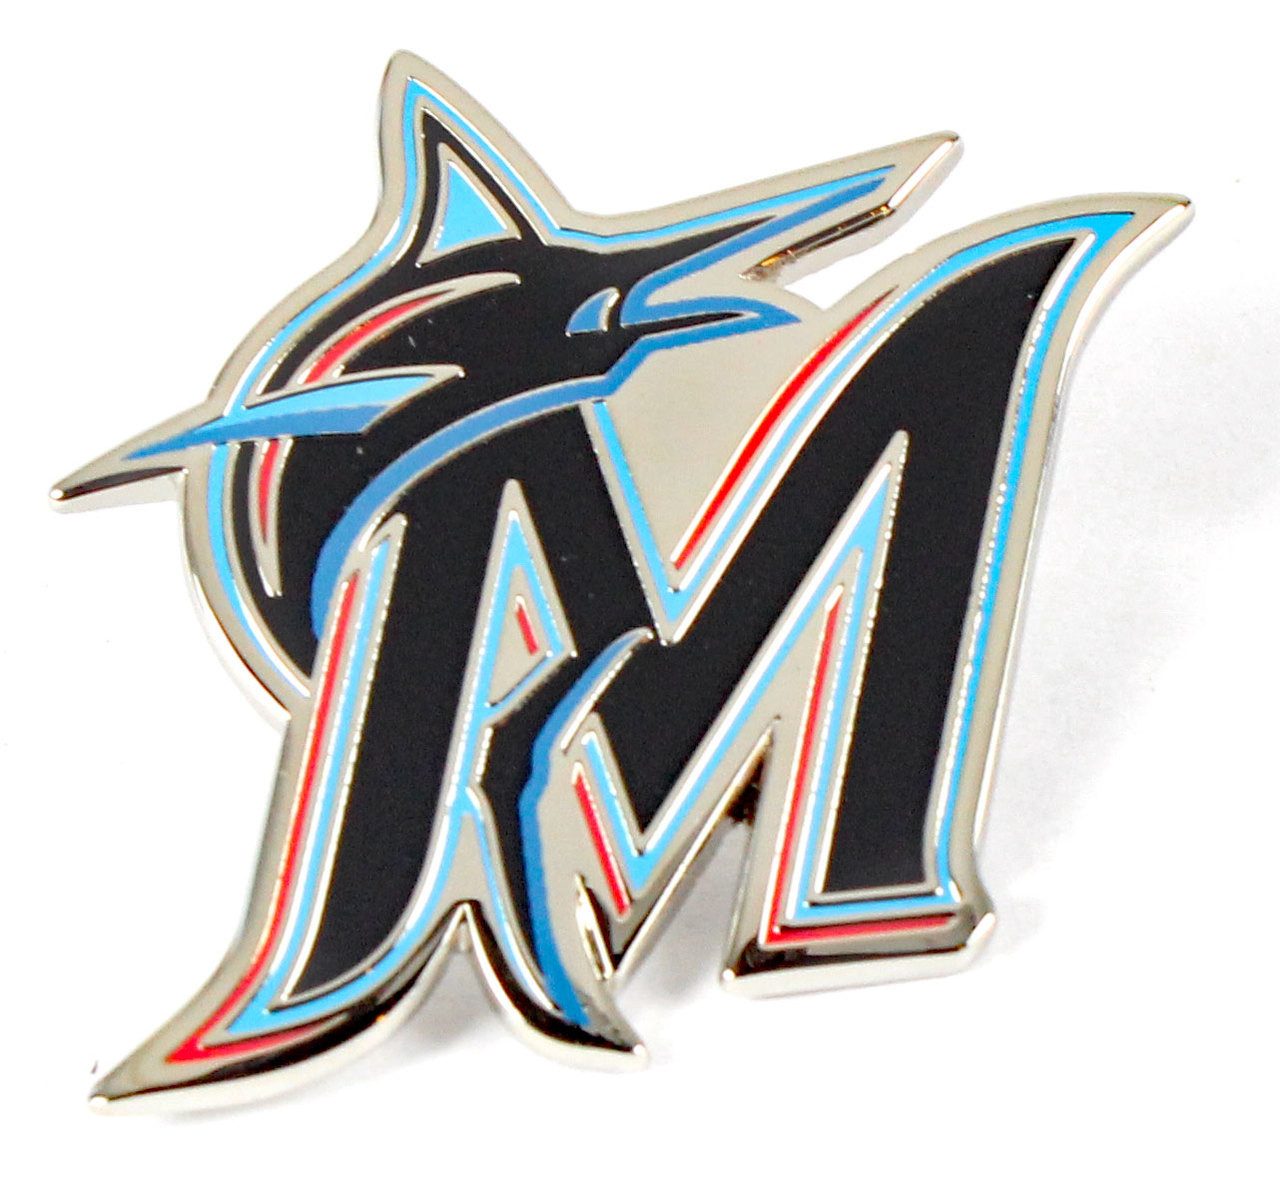 The Miami Marlins logo is AWFUL 